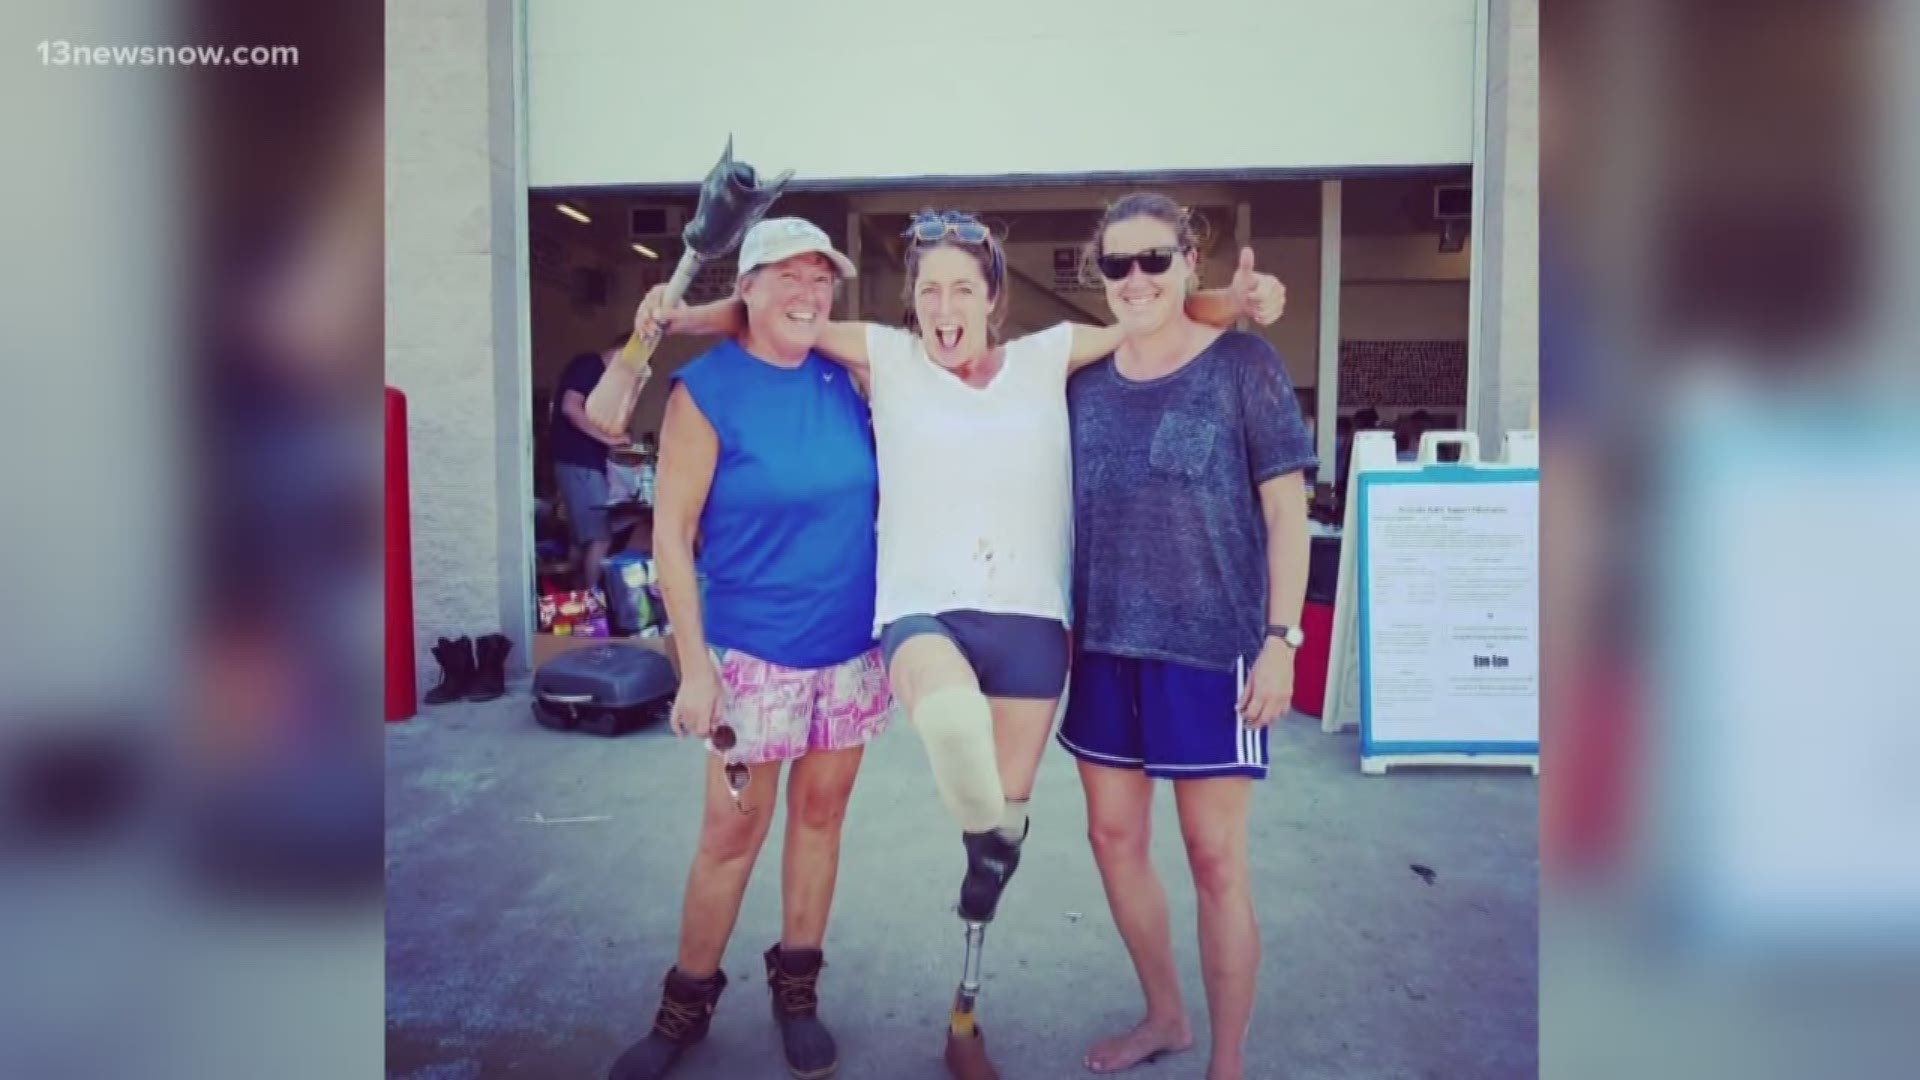 Kelly Shinn lost everything to Hurricane Dorian and after the storm, she lost her prosthetic leg. She thought it had been taken out to sea, but a beachgoer found the leg on the beach.